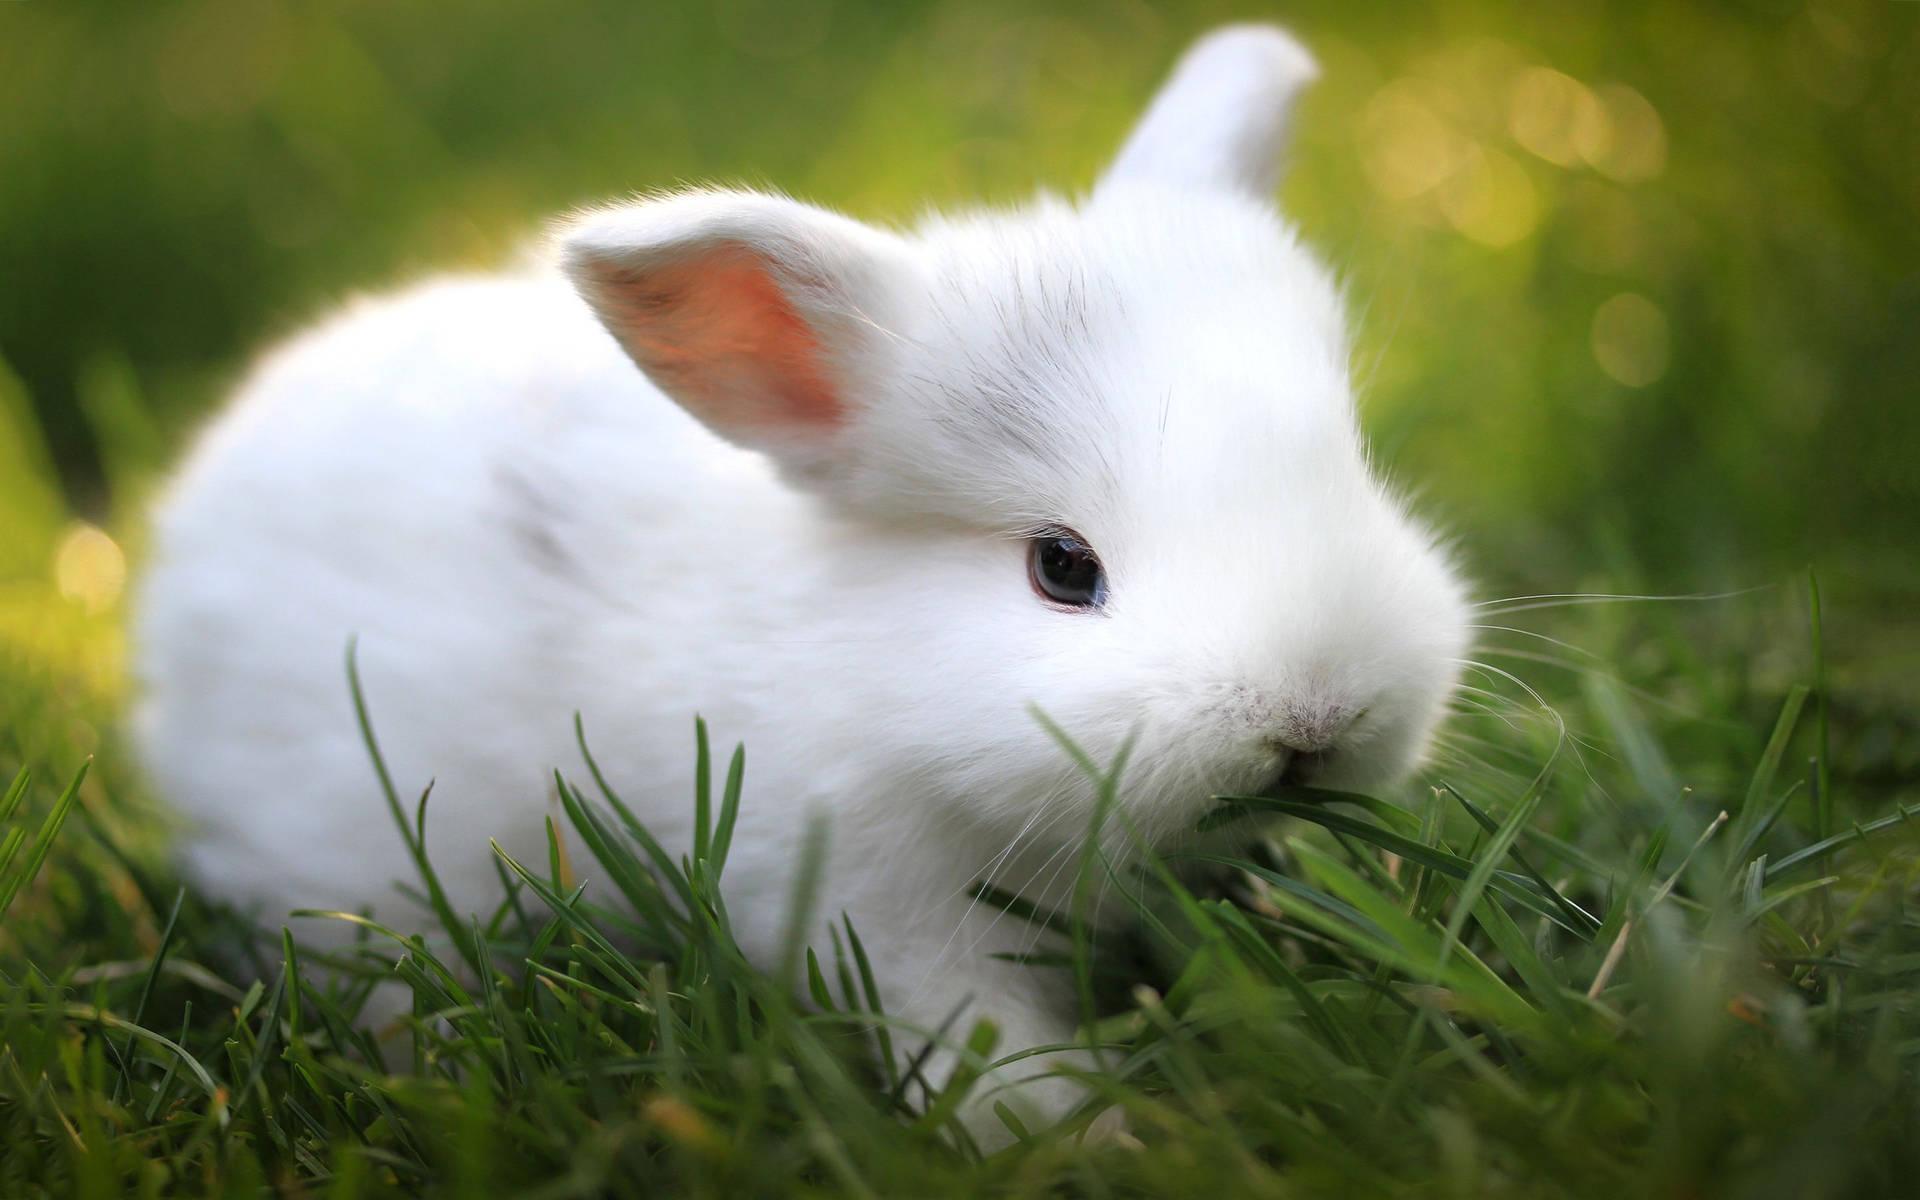 “This cute little white dwarf bunny is hoping you’ll come give it a cuddle!” Wallpaper